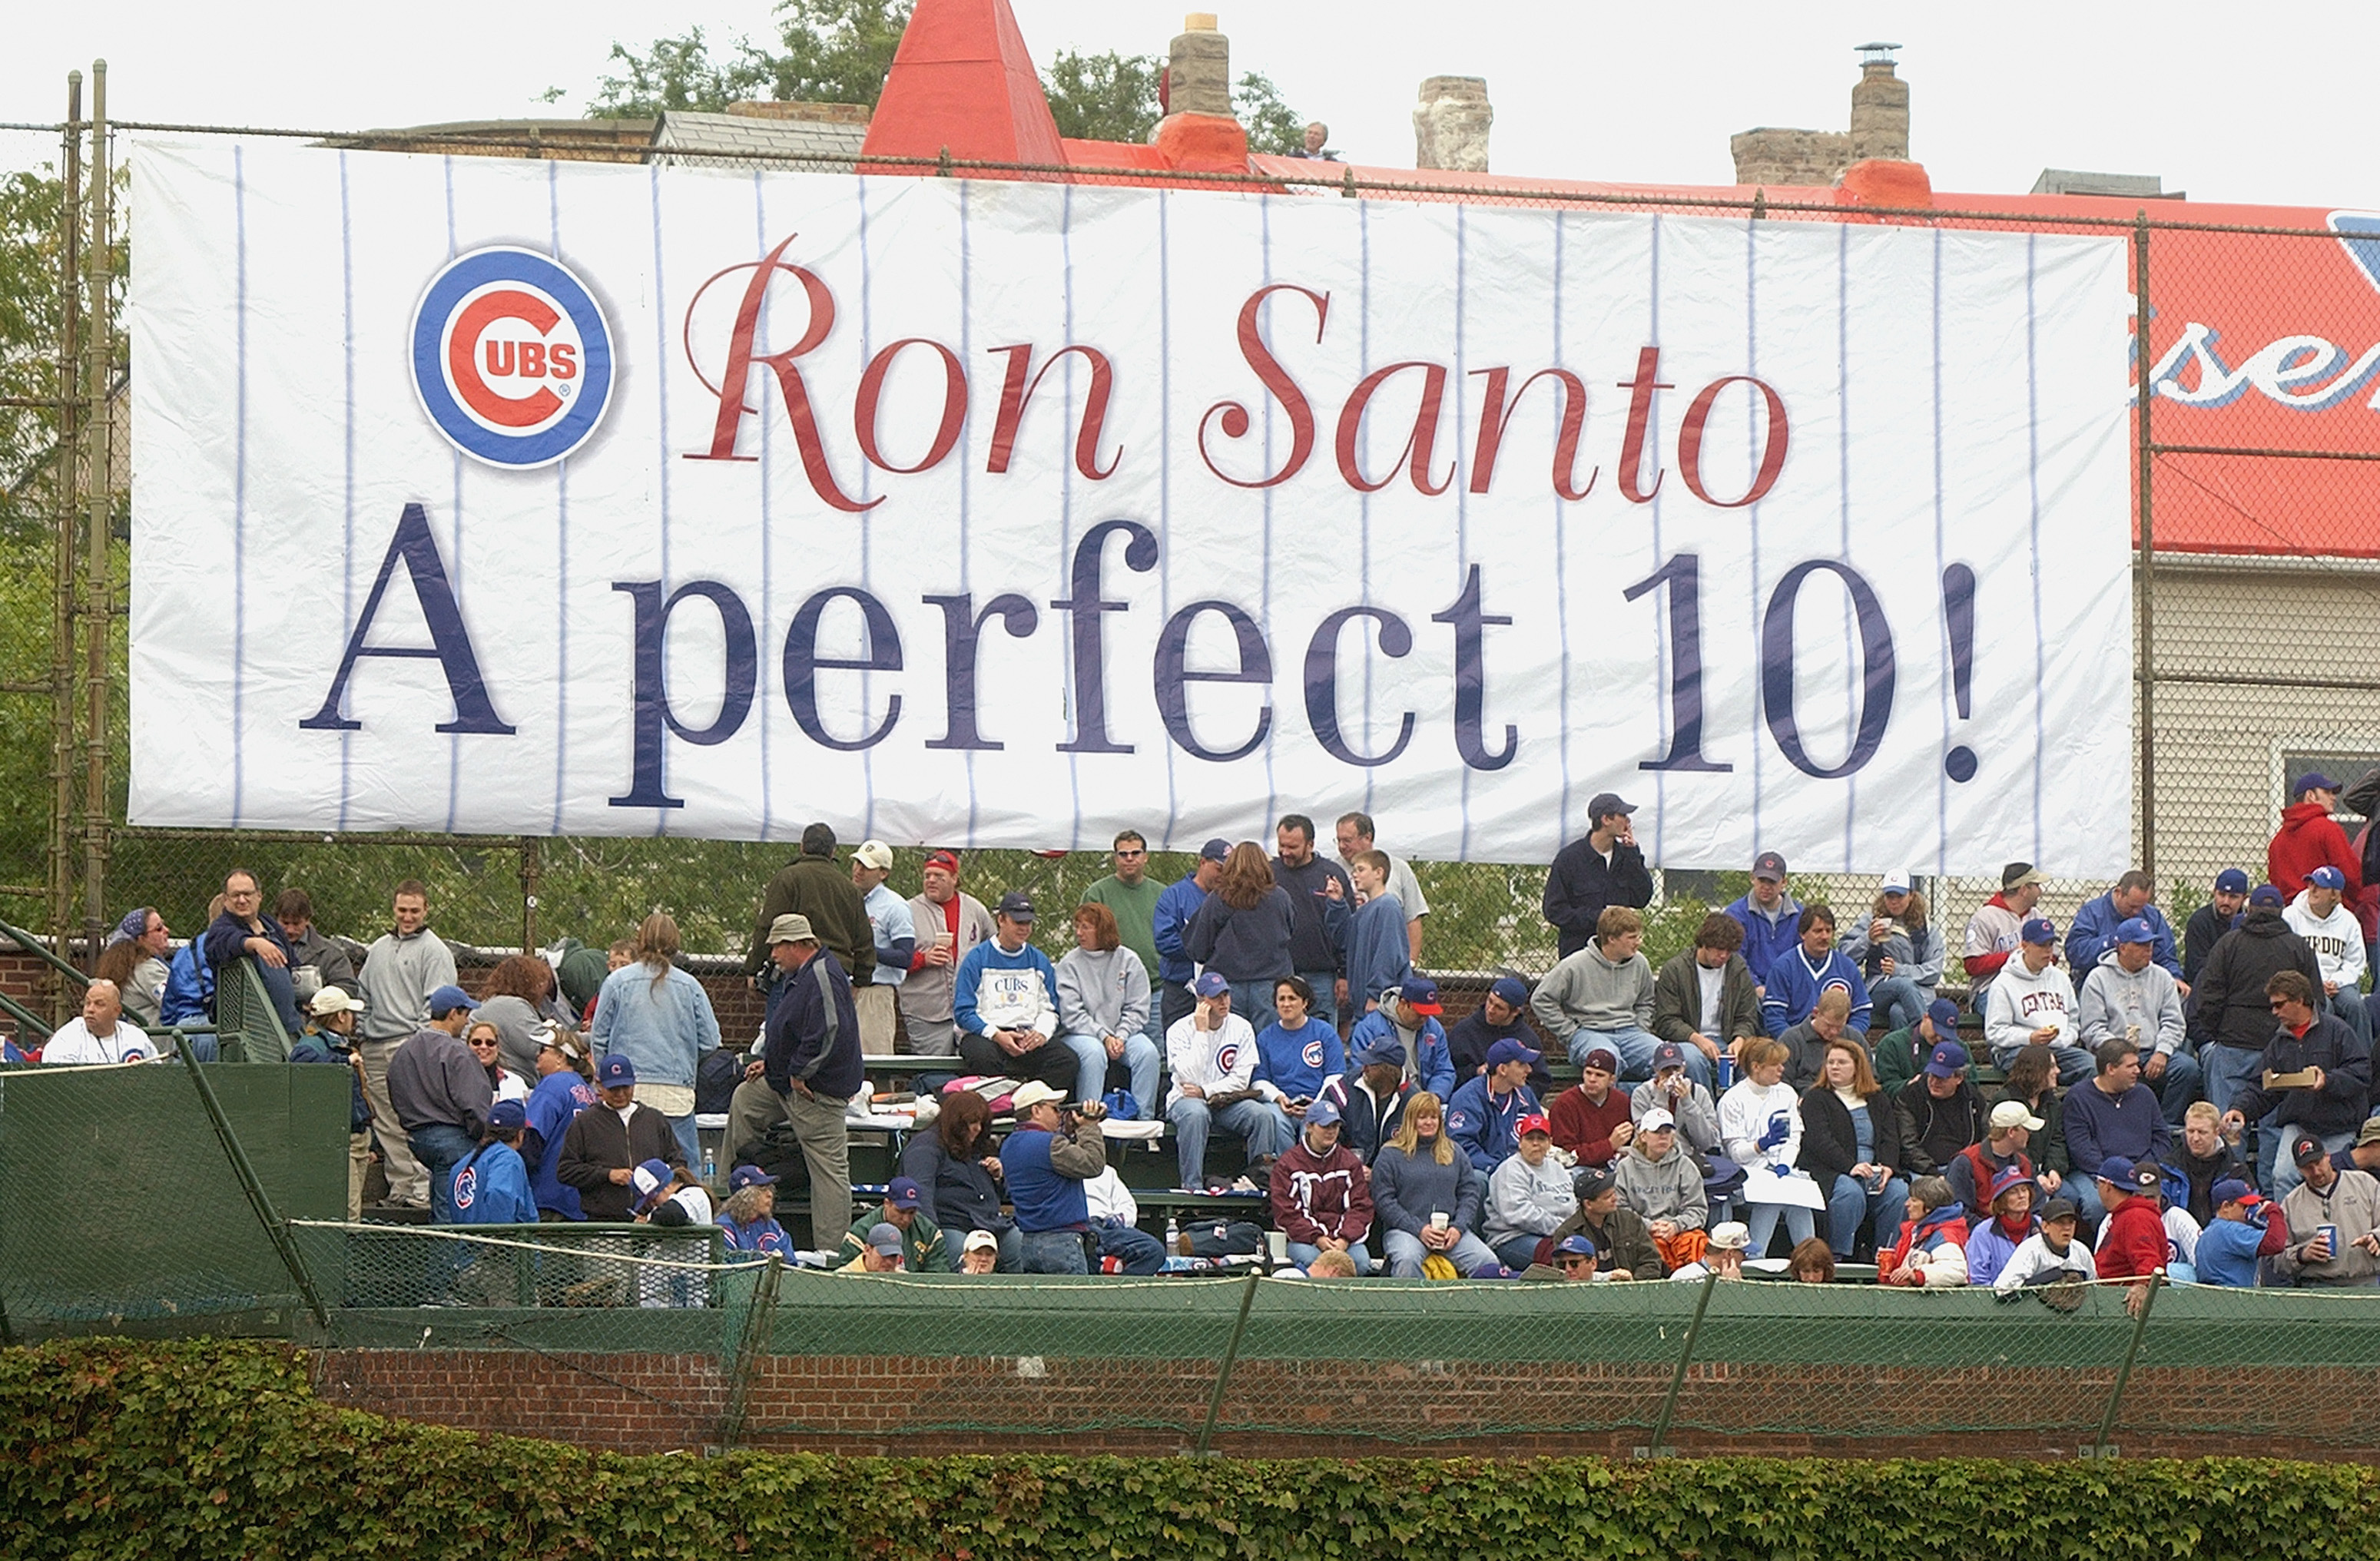 CHICAGO - SEPTEMBER 28:  Fans of the Chicago Cubs watch the game in front of a sign honoring longtime Cubs third baseman and current WGN Radio color commentator Ron Santo (Santo's number 10 was retired in a pregame ceremony) during a game against the Pitt